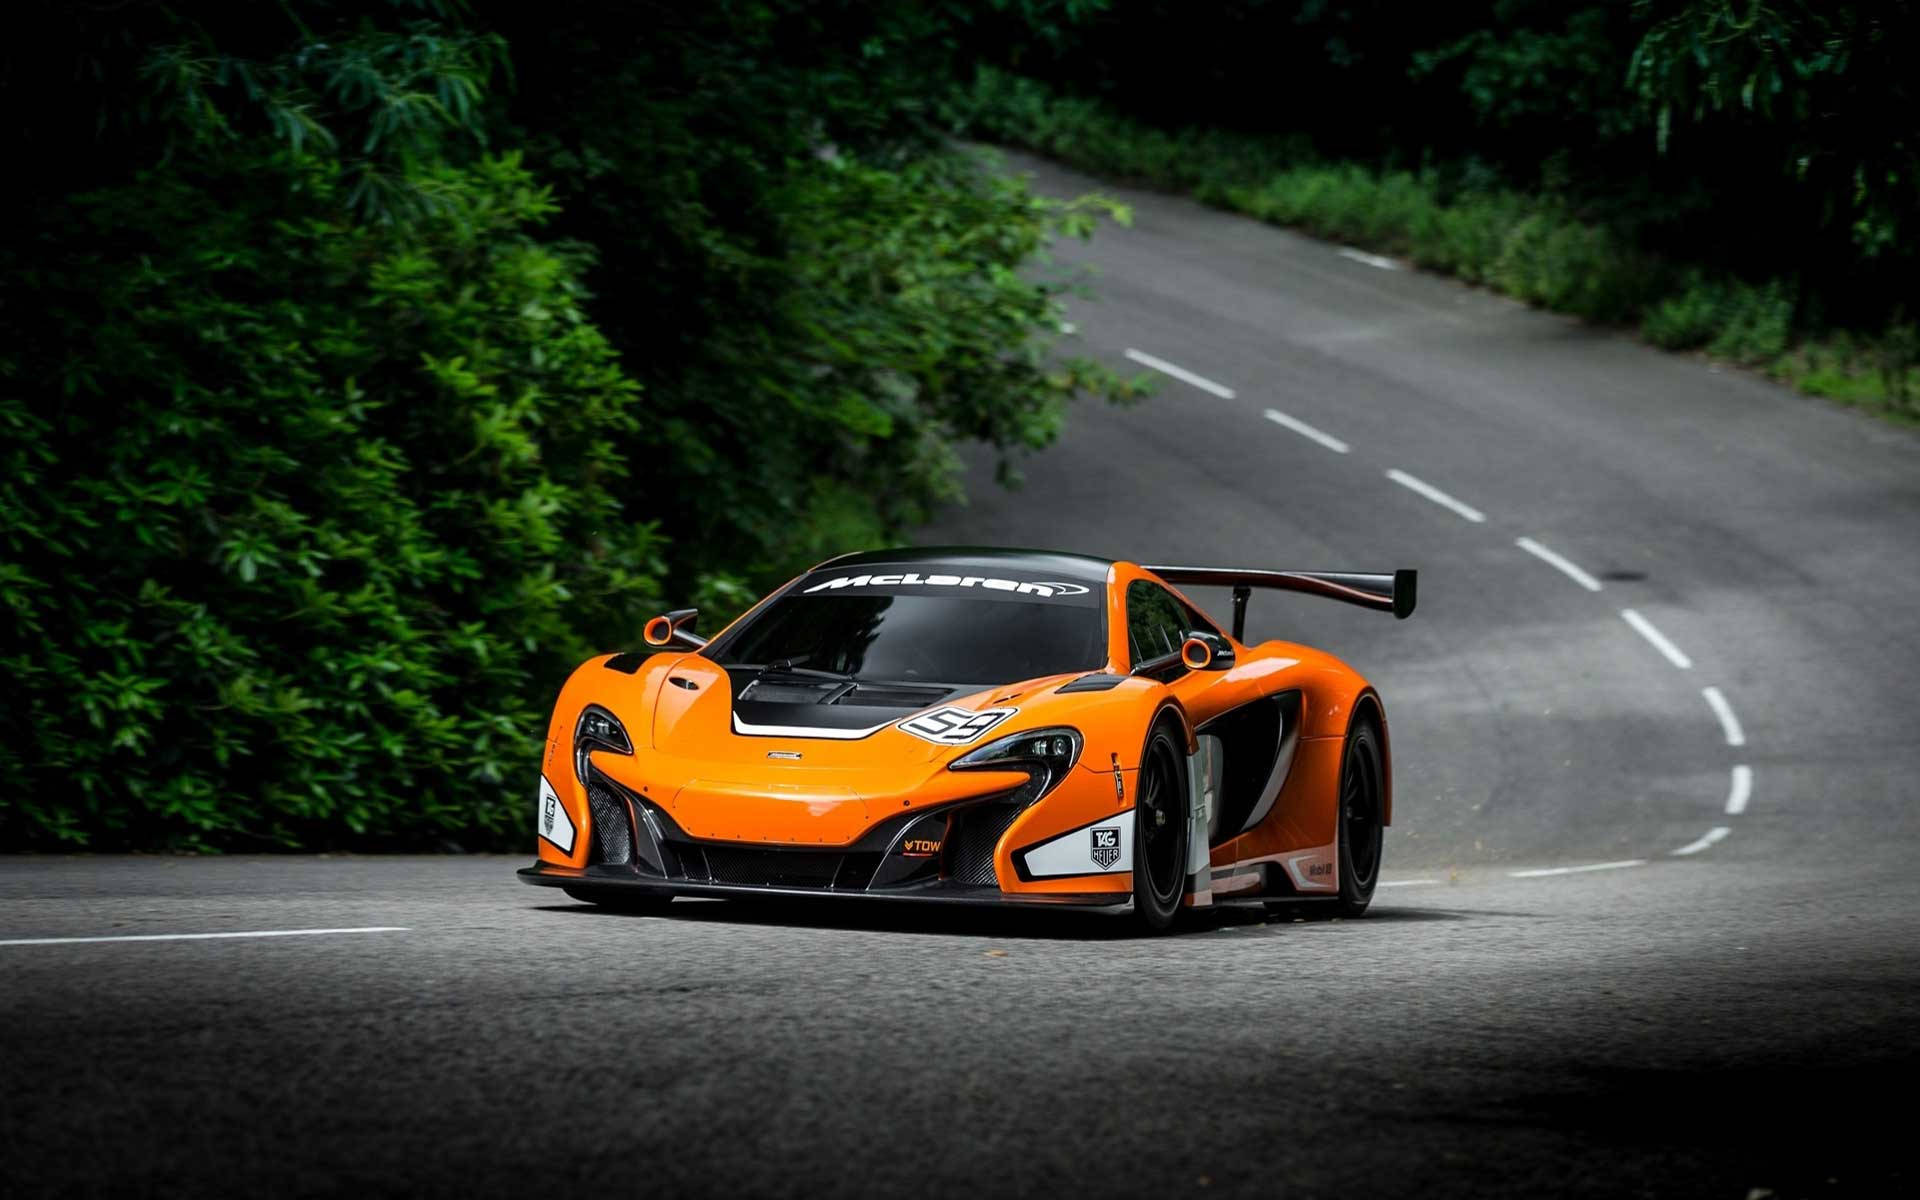 Dazzling Mclaren Gt3 - The Epitome Of Really Cool Cars